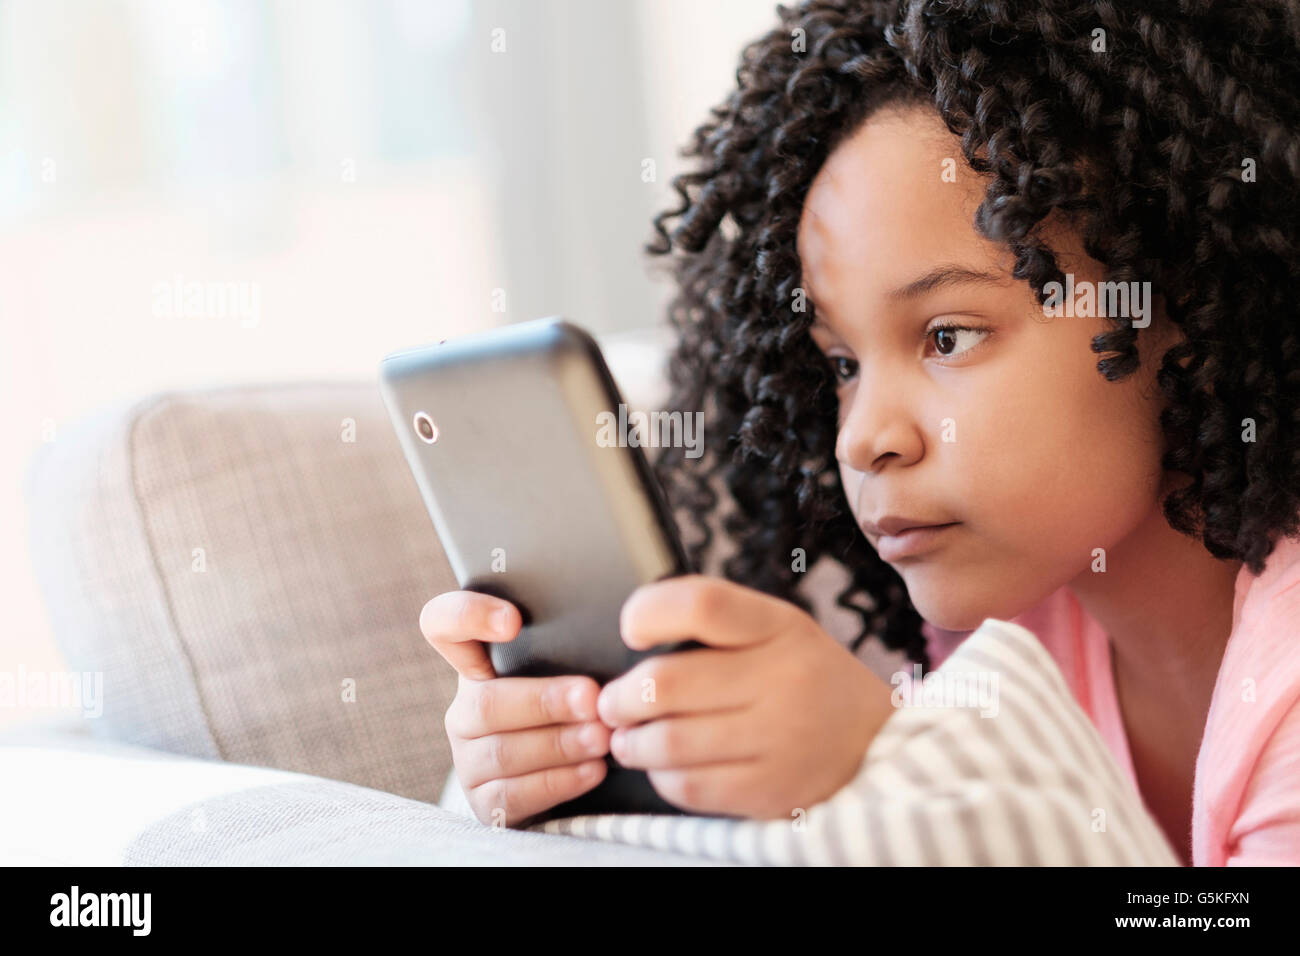 African American girl using cell phone on sofa Stock Photo